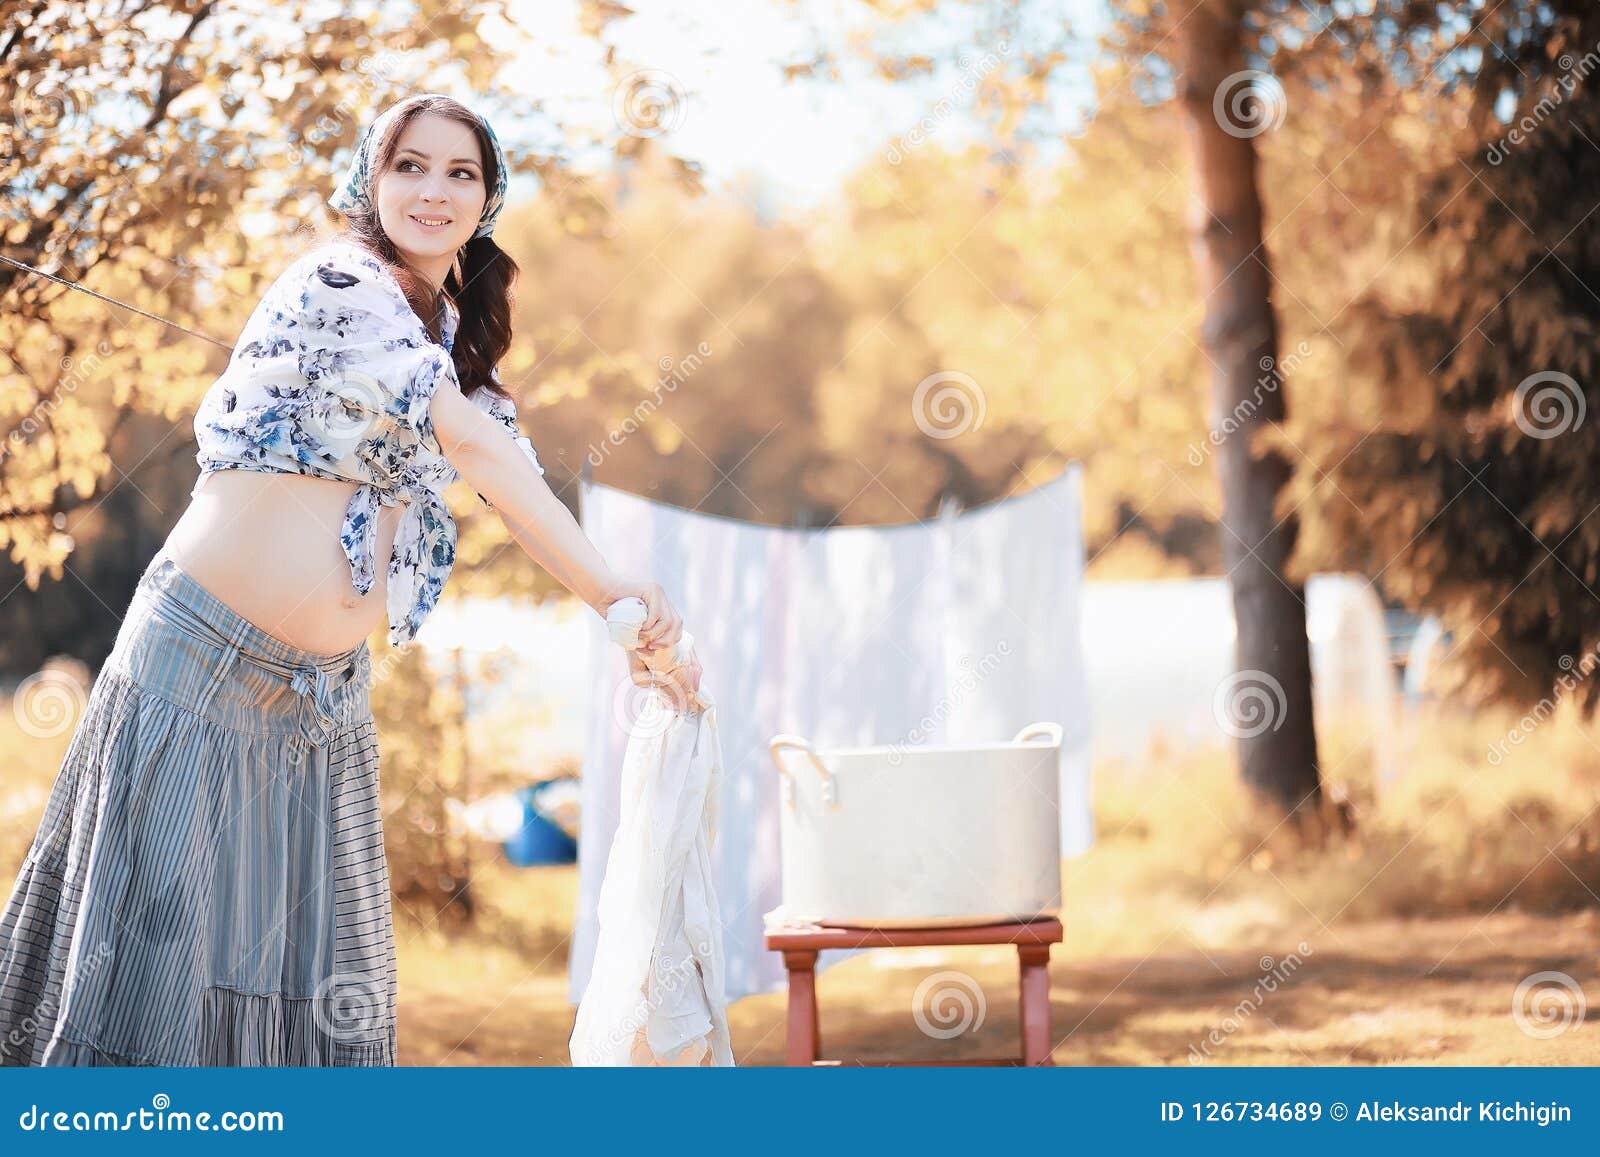 Pregnant Woman Hanging Sheets on the Rope for Drying Stock Image ...